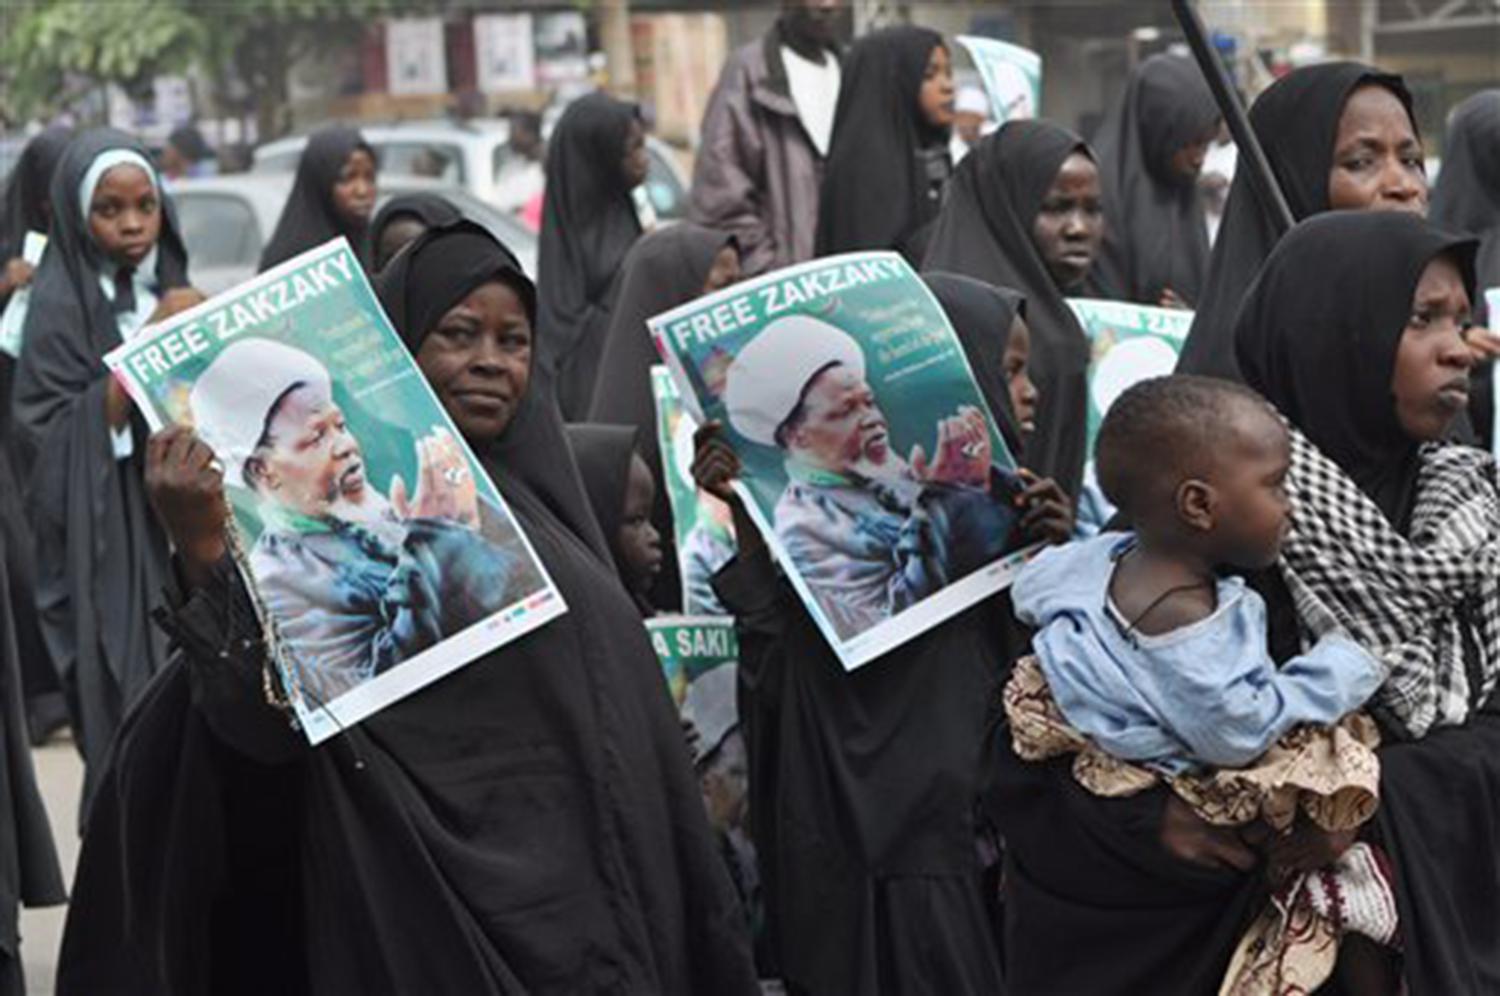 Members of Islamic Movement of Nigeria, a Shia group, demand the release of the group’s leader, Sheik Ibrahim Zakzaky, who was arrested on December 14, 2015.  © AP Photo/Muhammed Giginyu